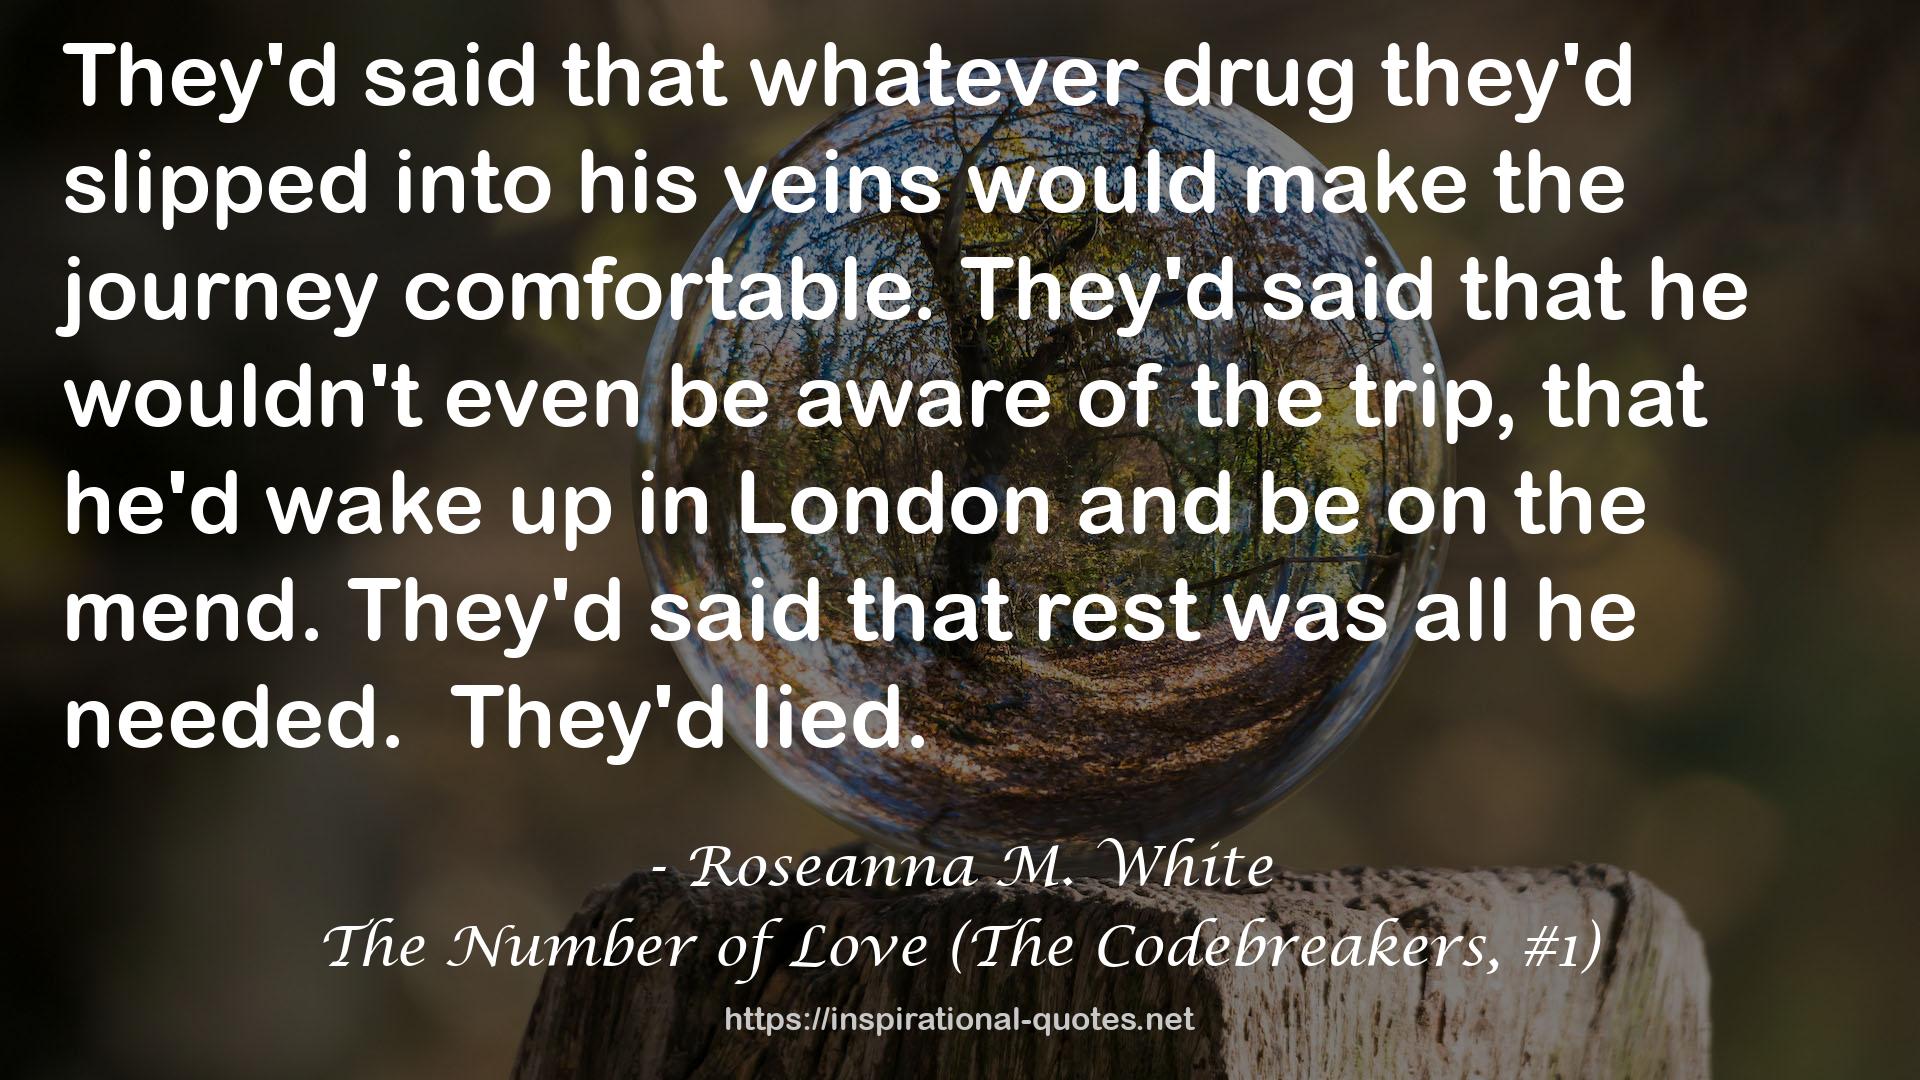 The Number of Love (The Codebreakers, #1) QUOTES